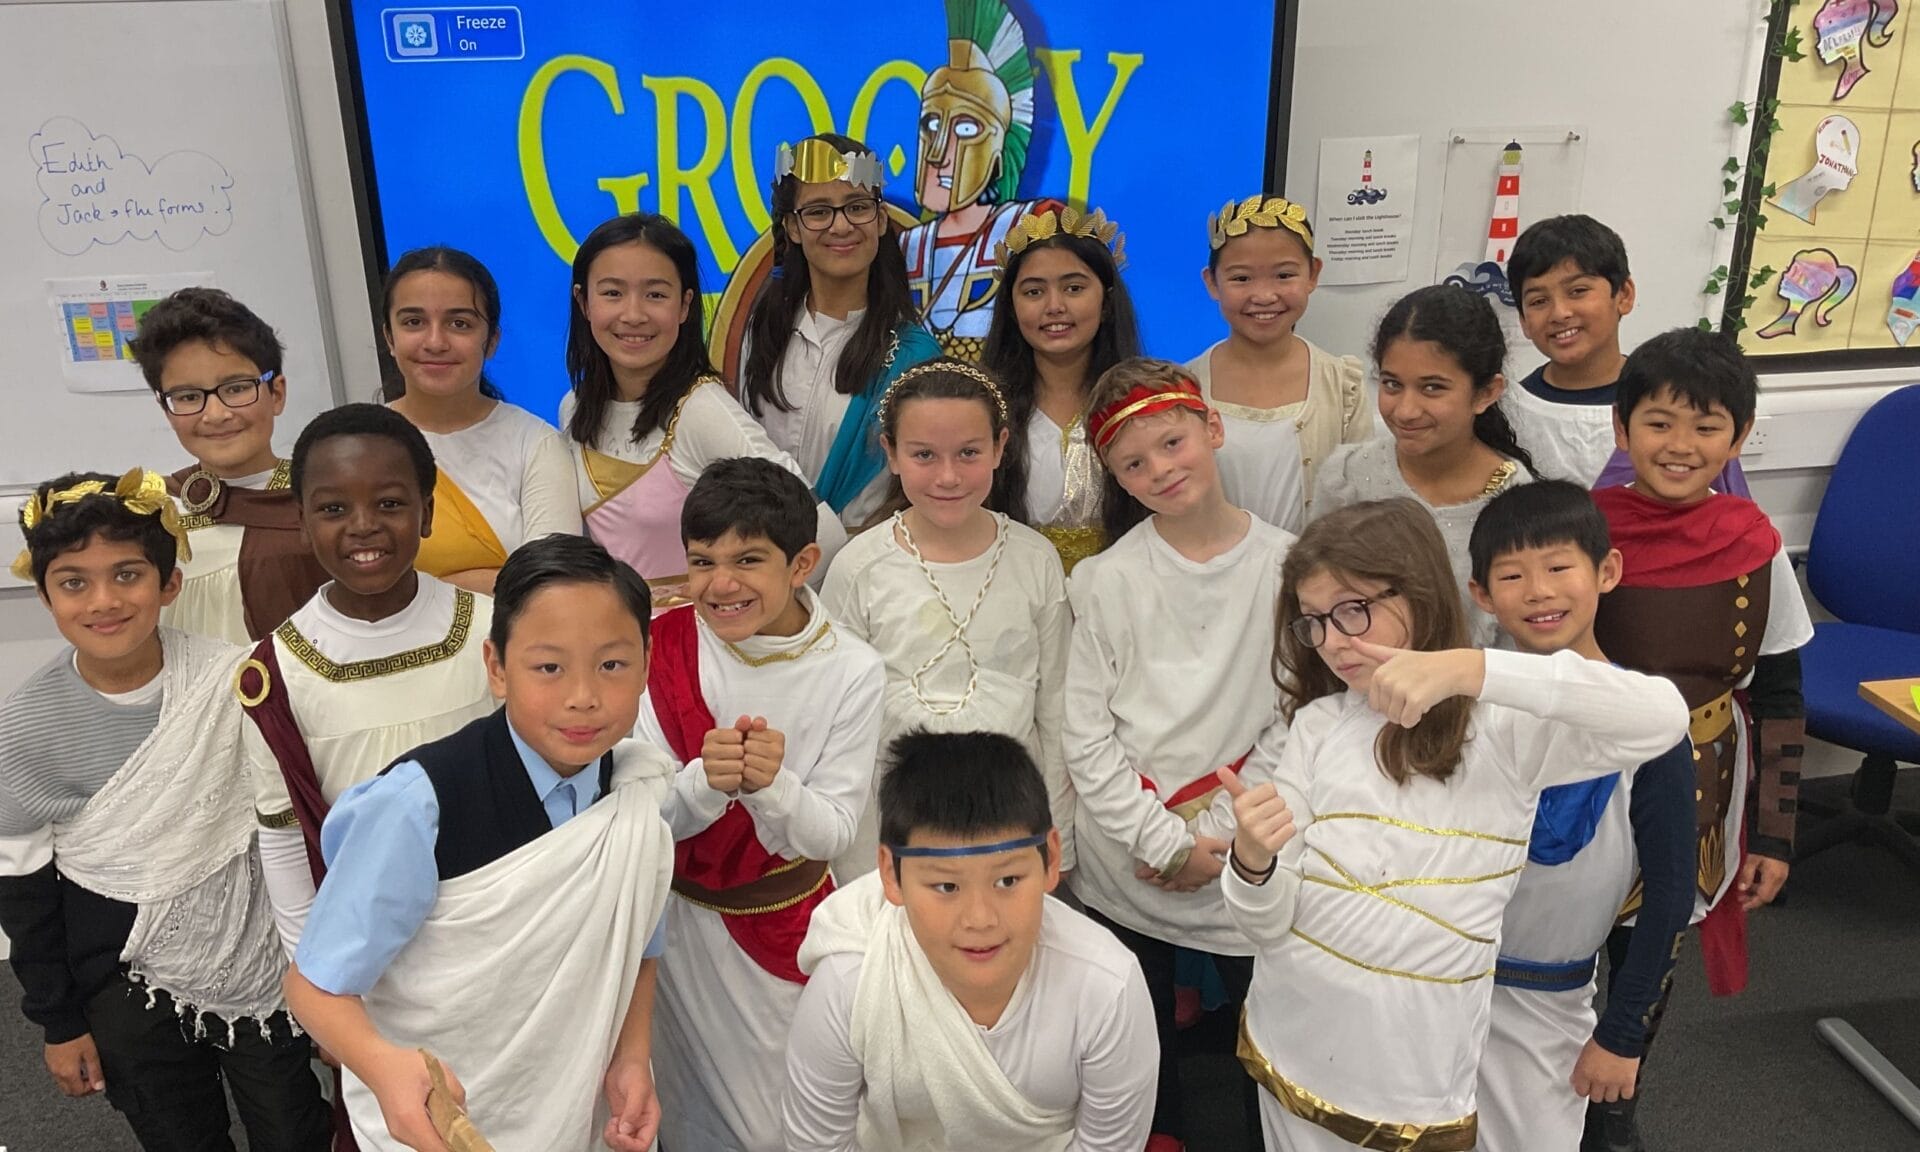 Year 6, dressed in togas, celebrate their Ancient Greek enrichment day.